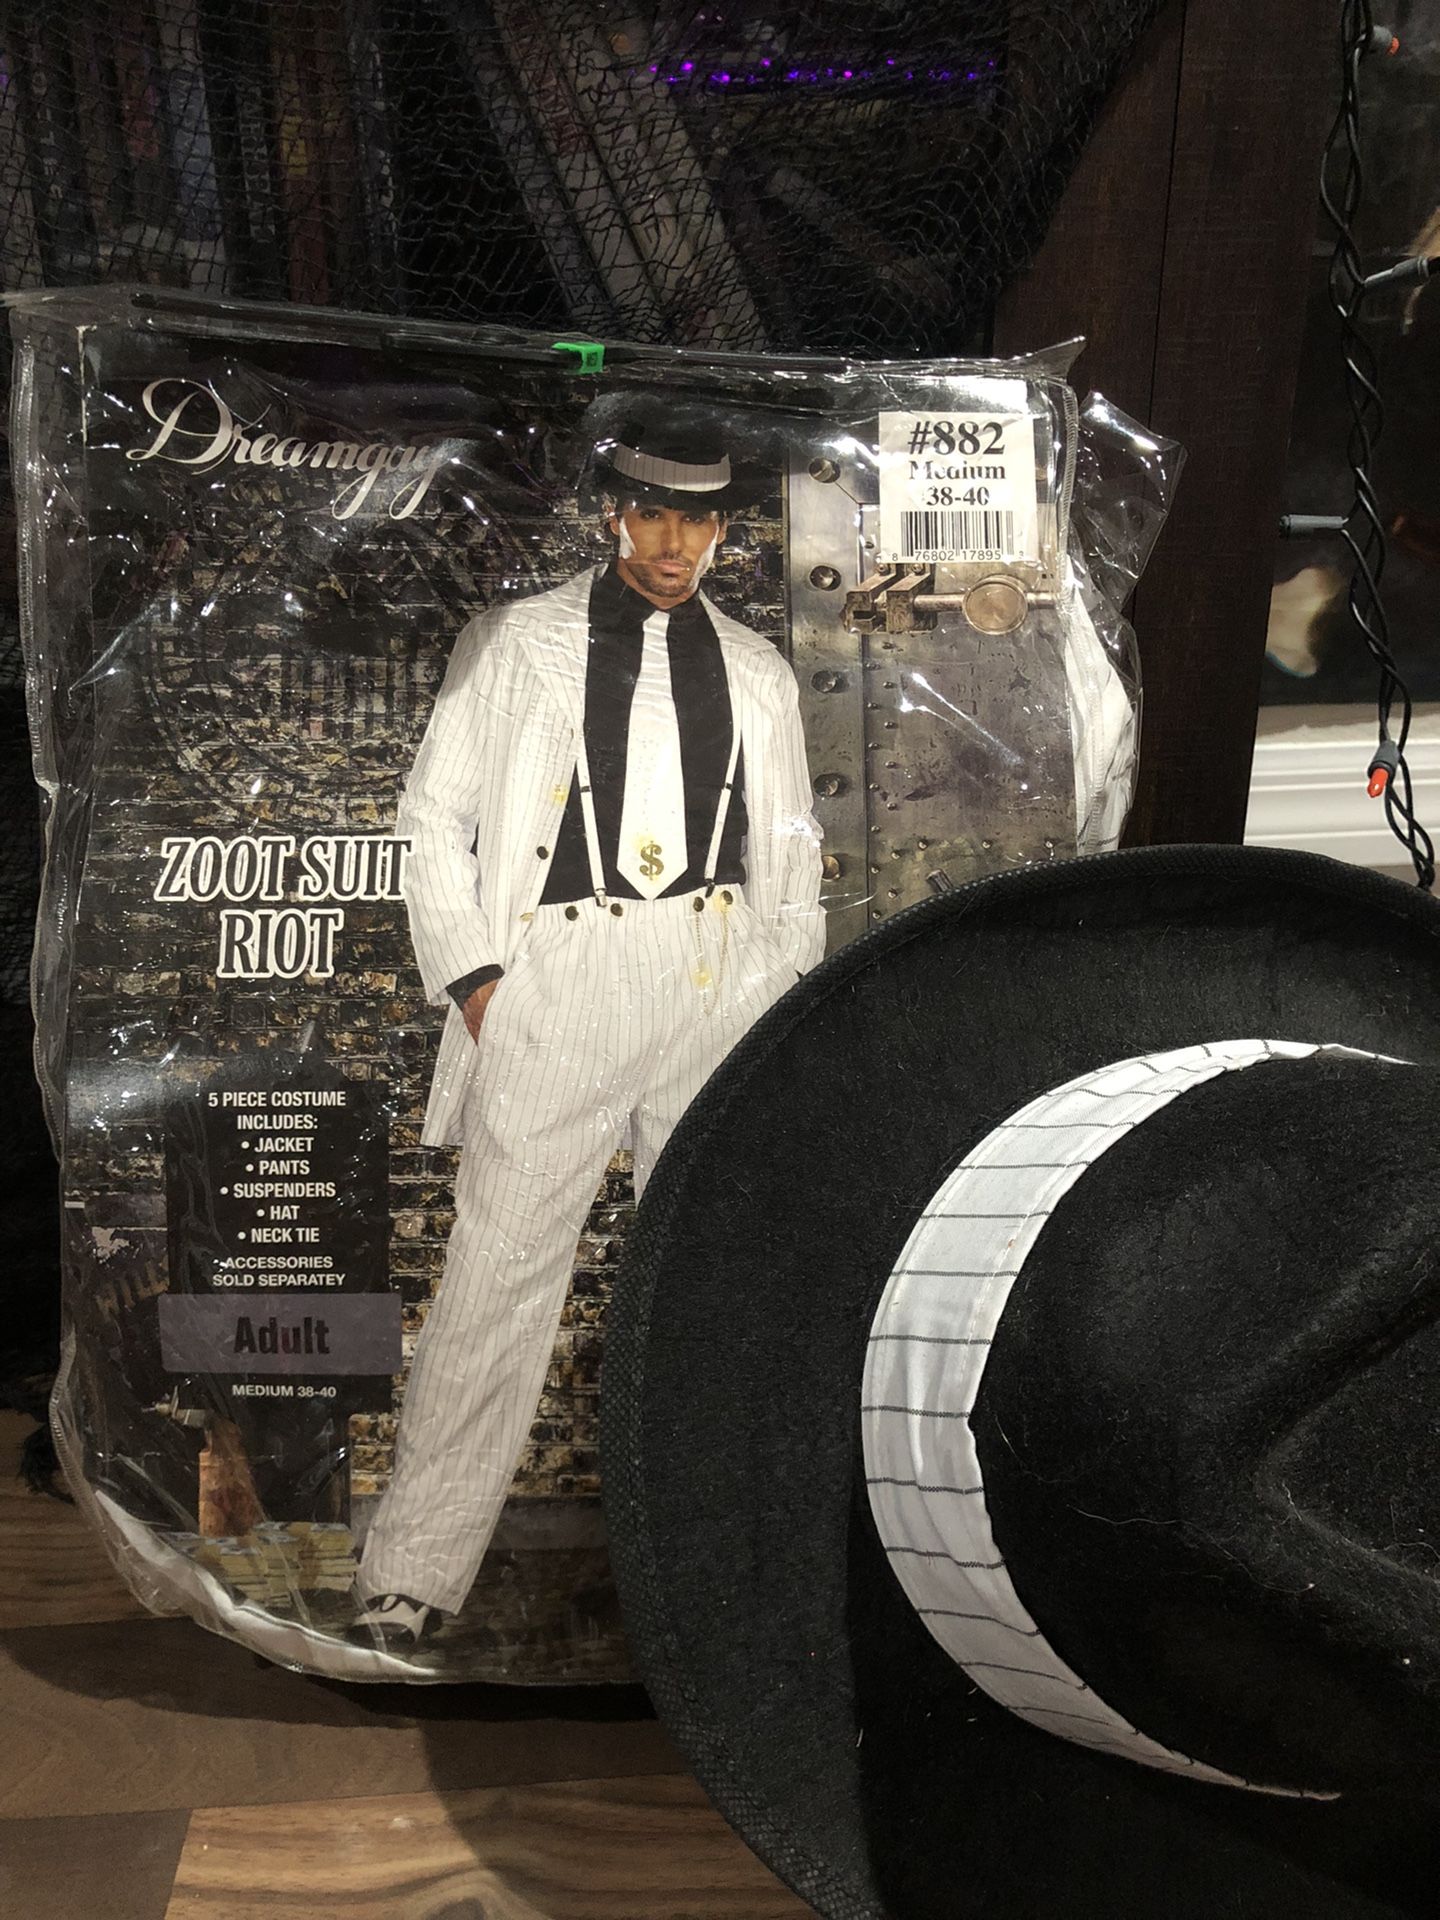 Mob/Gangster/Zoot Suit Costume